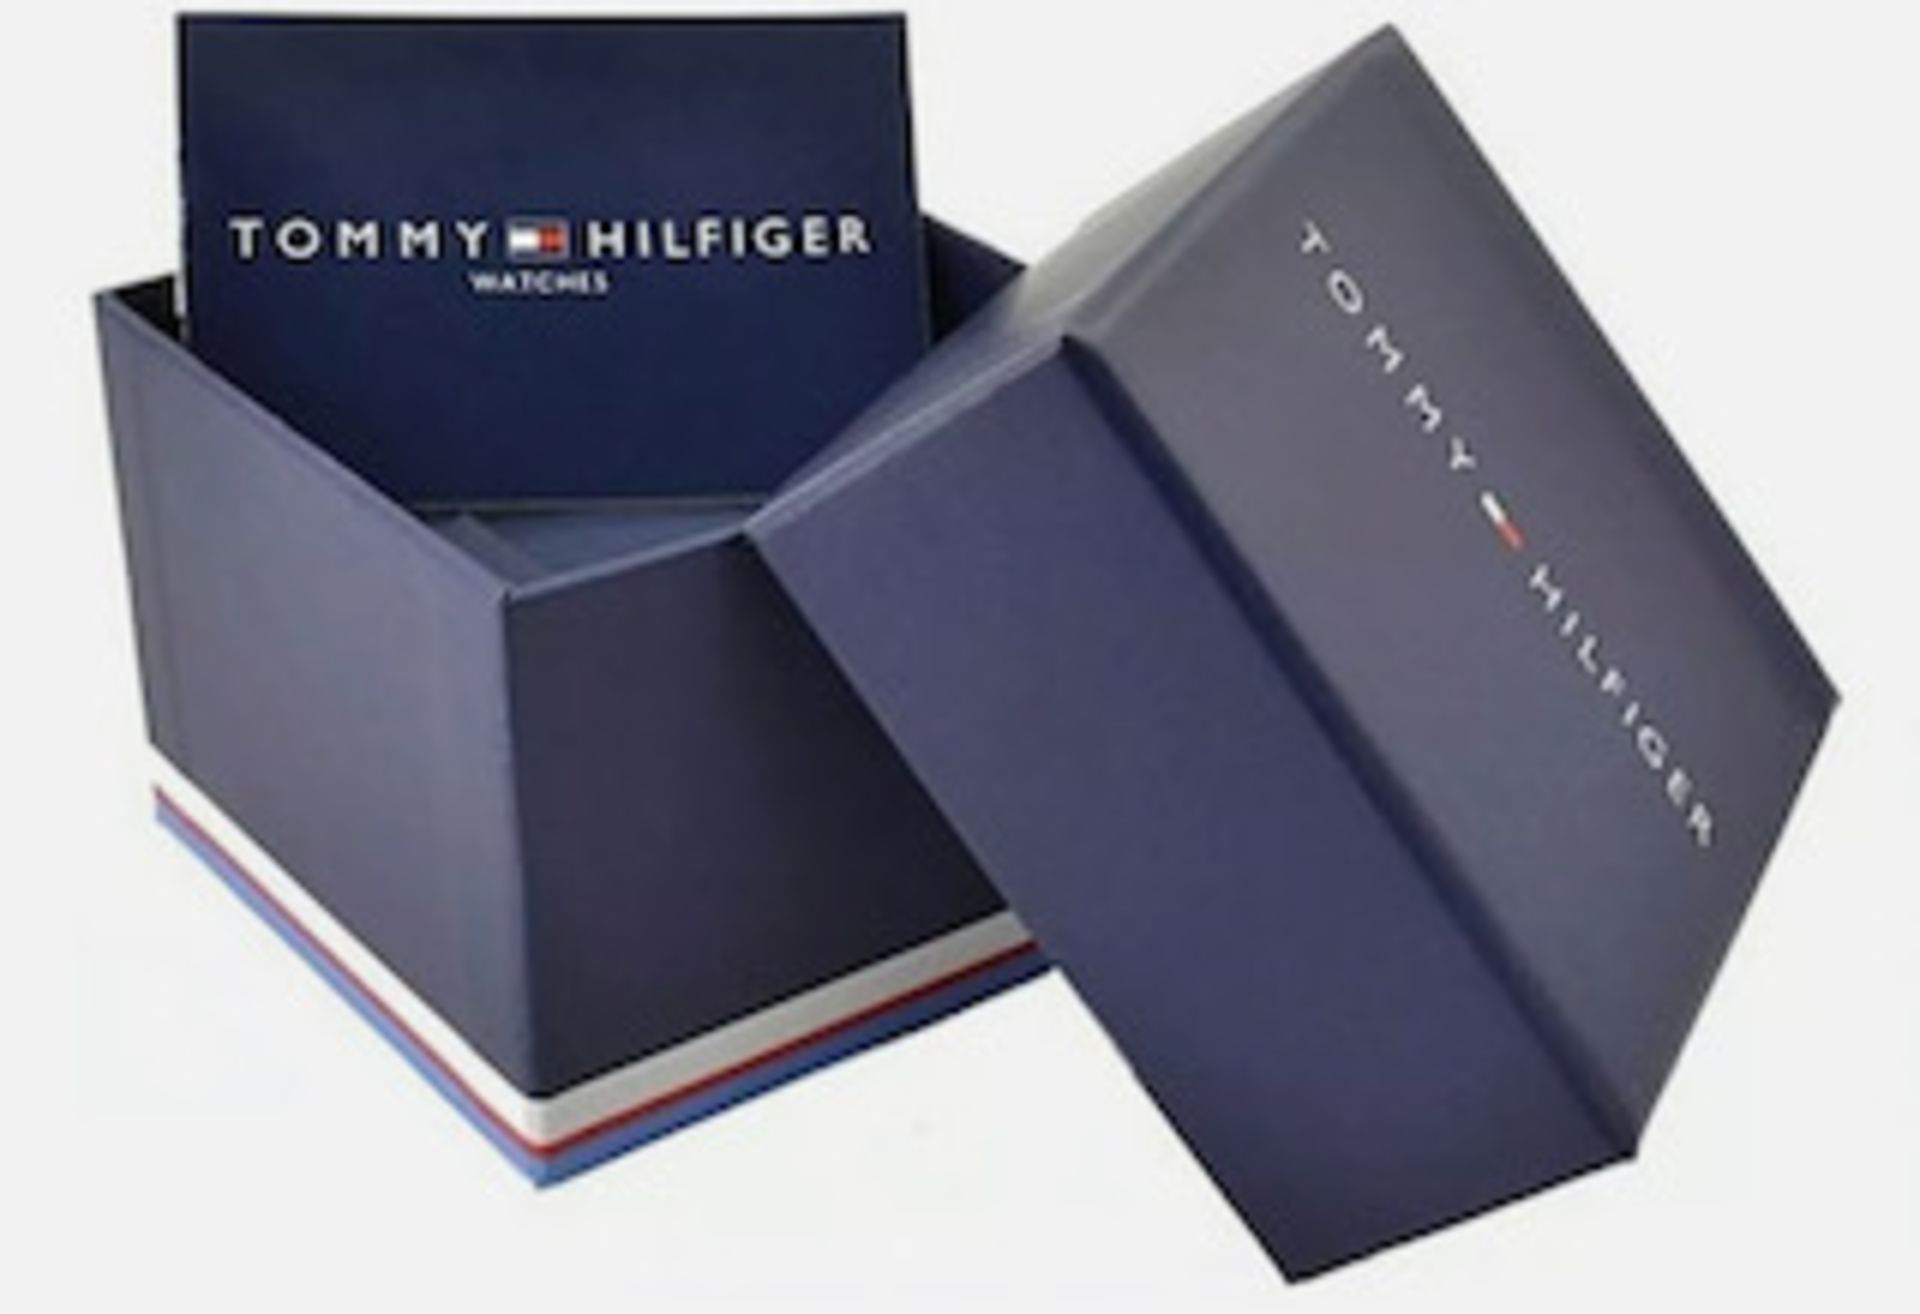 Tommy Hilfiger 1791401 Kane Chronograph Leather Watch In Black - Image 6 of 6